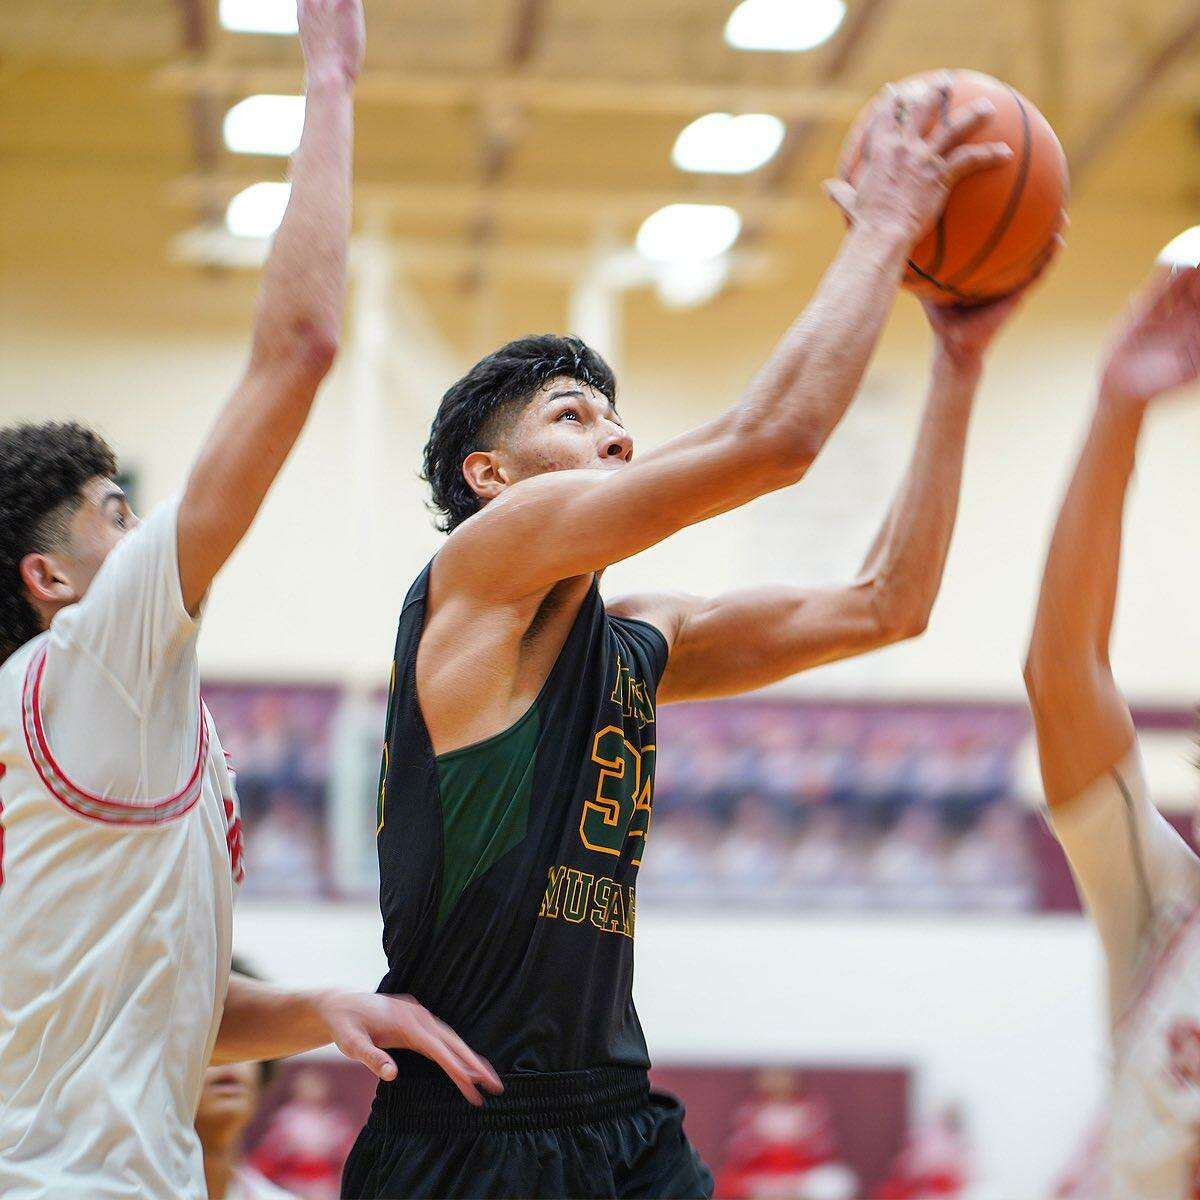 Nixon’s Ian Tovar scored 16 points, including the final four with the final two coming in the last second, in the Mustangs’ first-round playoff win over San Antonio Taft on Tuesday.